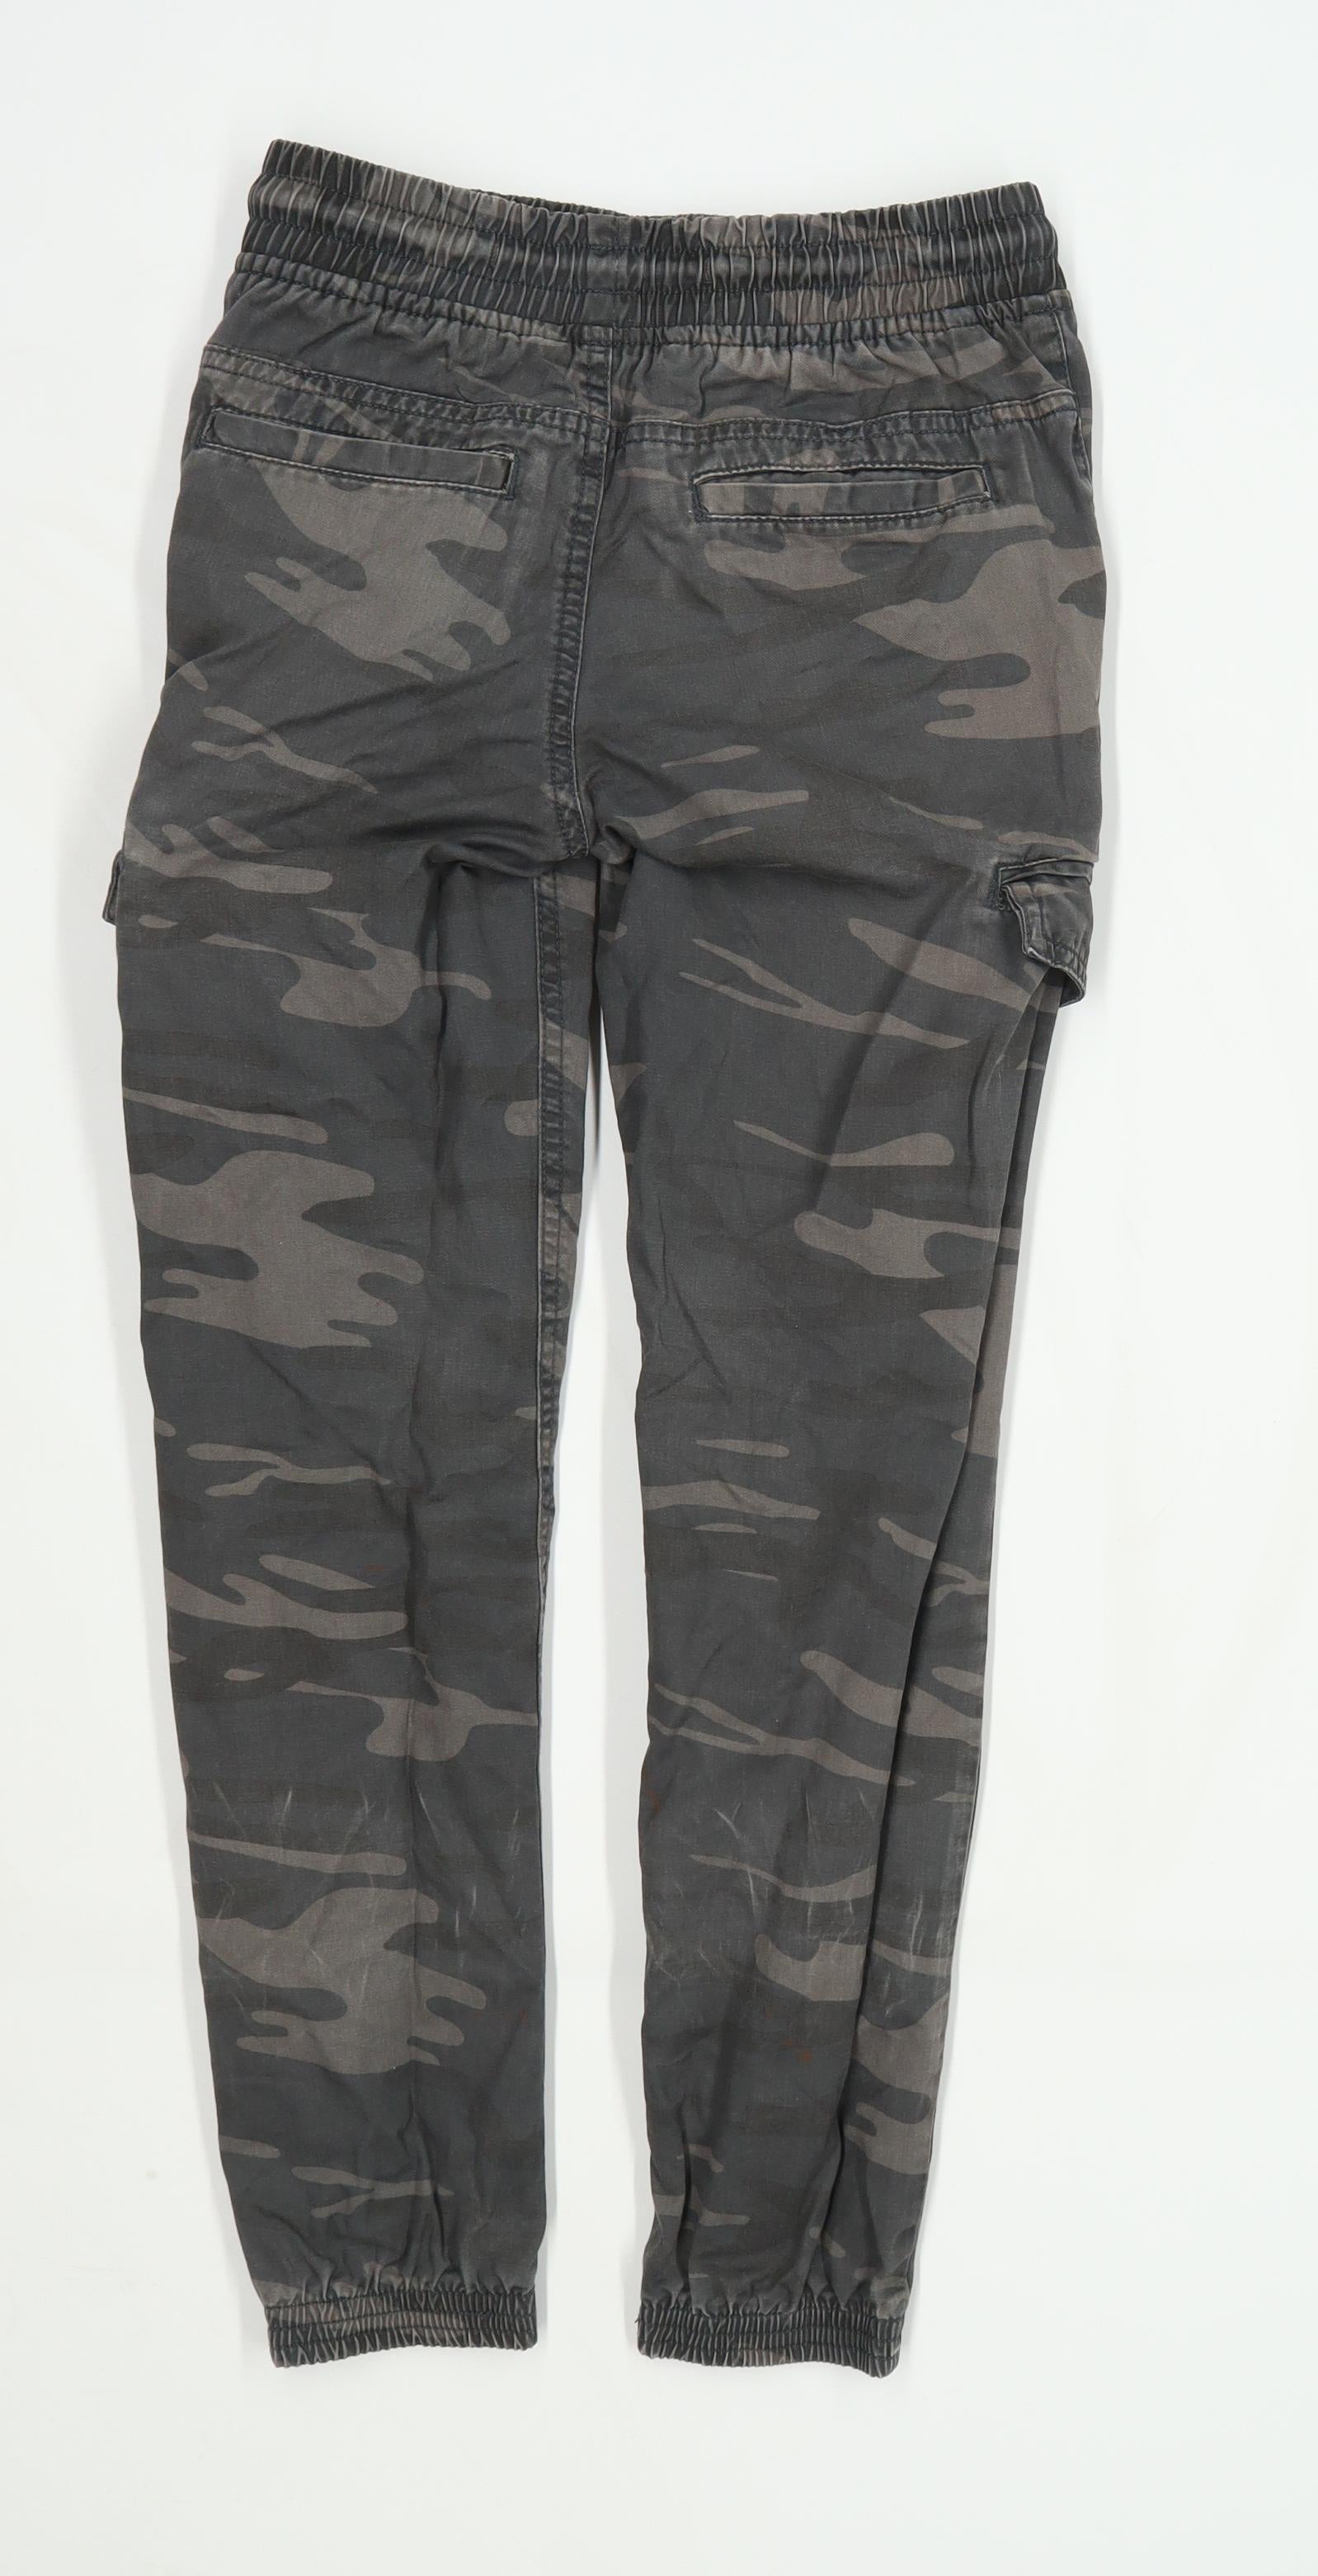 WOMENS PRIMARK CAMO Trousers. Size 4, Great Condition £1.80 - PicClick UK